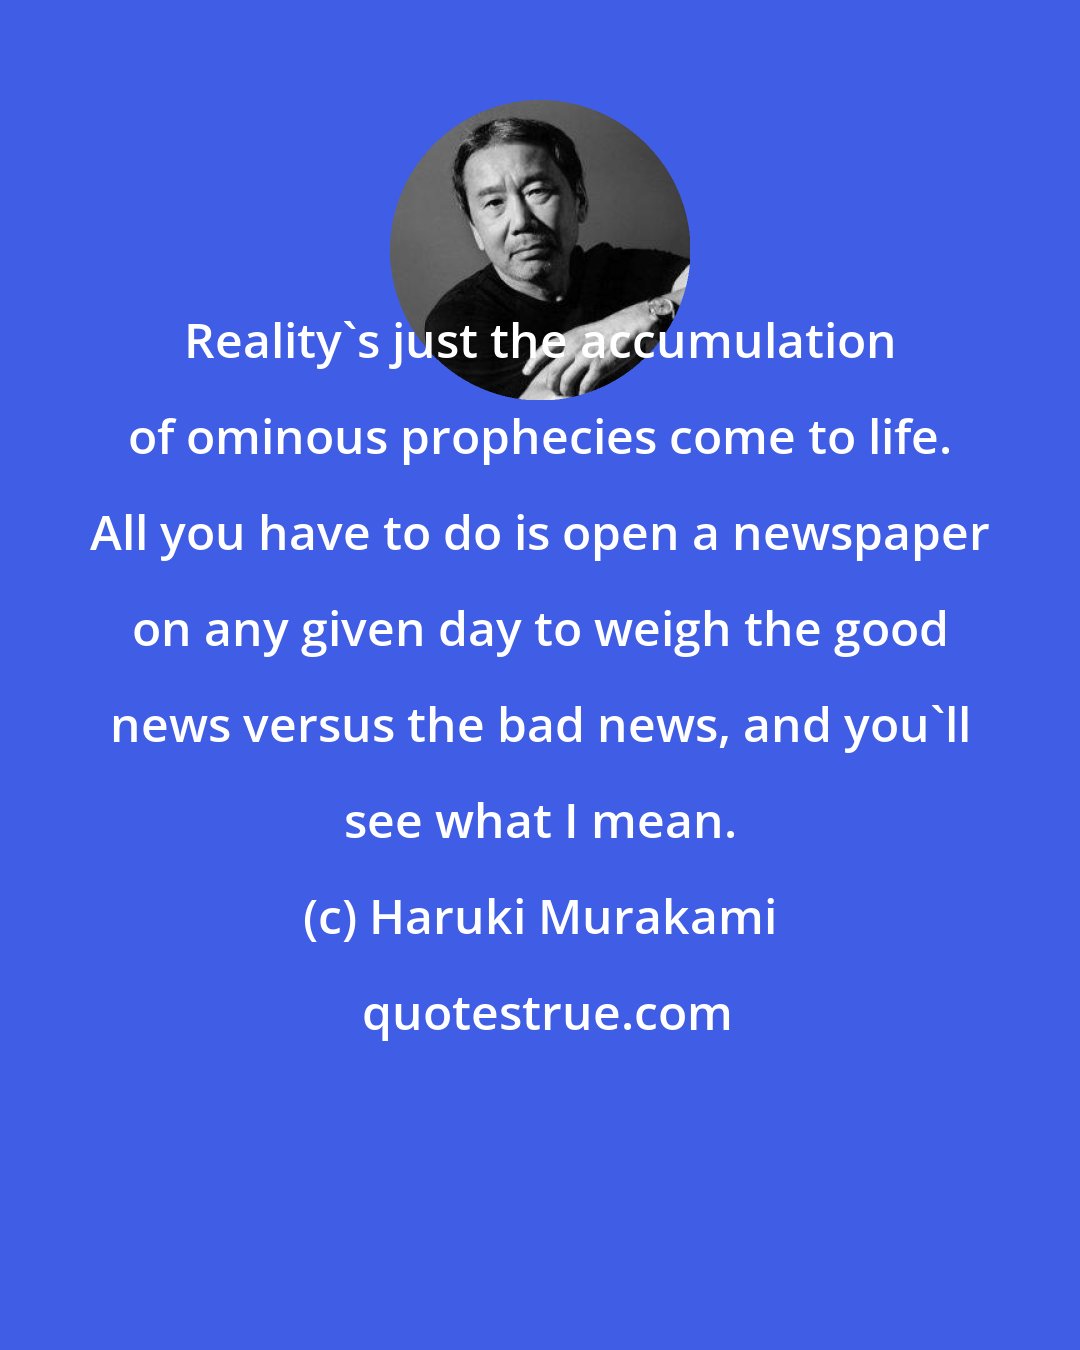 Haruki Murakami: Reality's just the accumulation of ominous prophecies come to life. All you have to do is open a newspaper on any given day to weigh the good news versus the bad news, and you'll see what I mean.